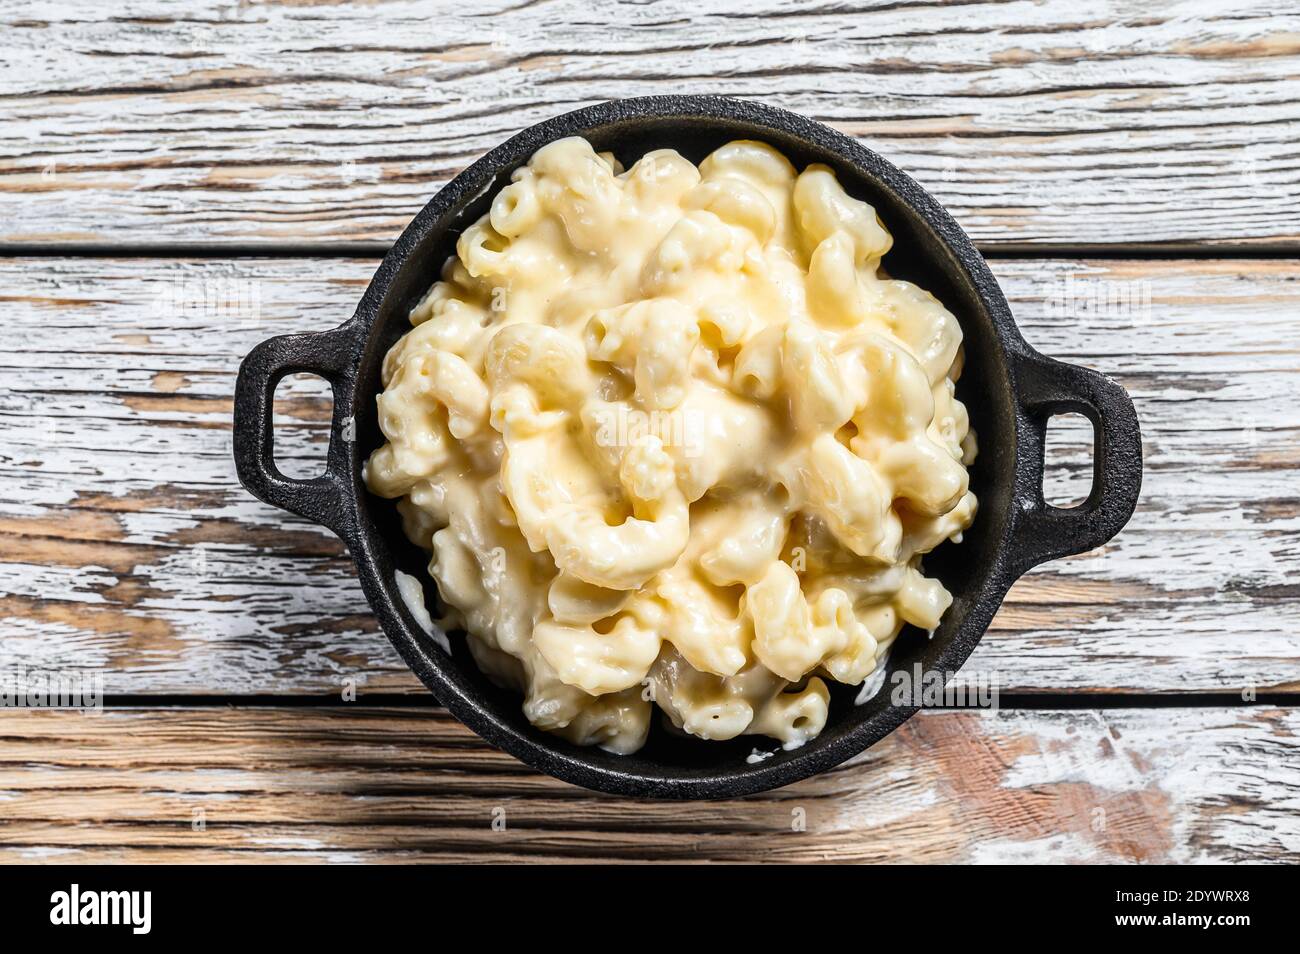 Mac and cheese, american style macaroni pasta in cheesy sauce. White wooden  background. Top view Stock Photo - Alamy